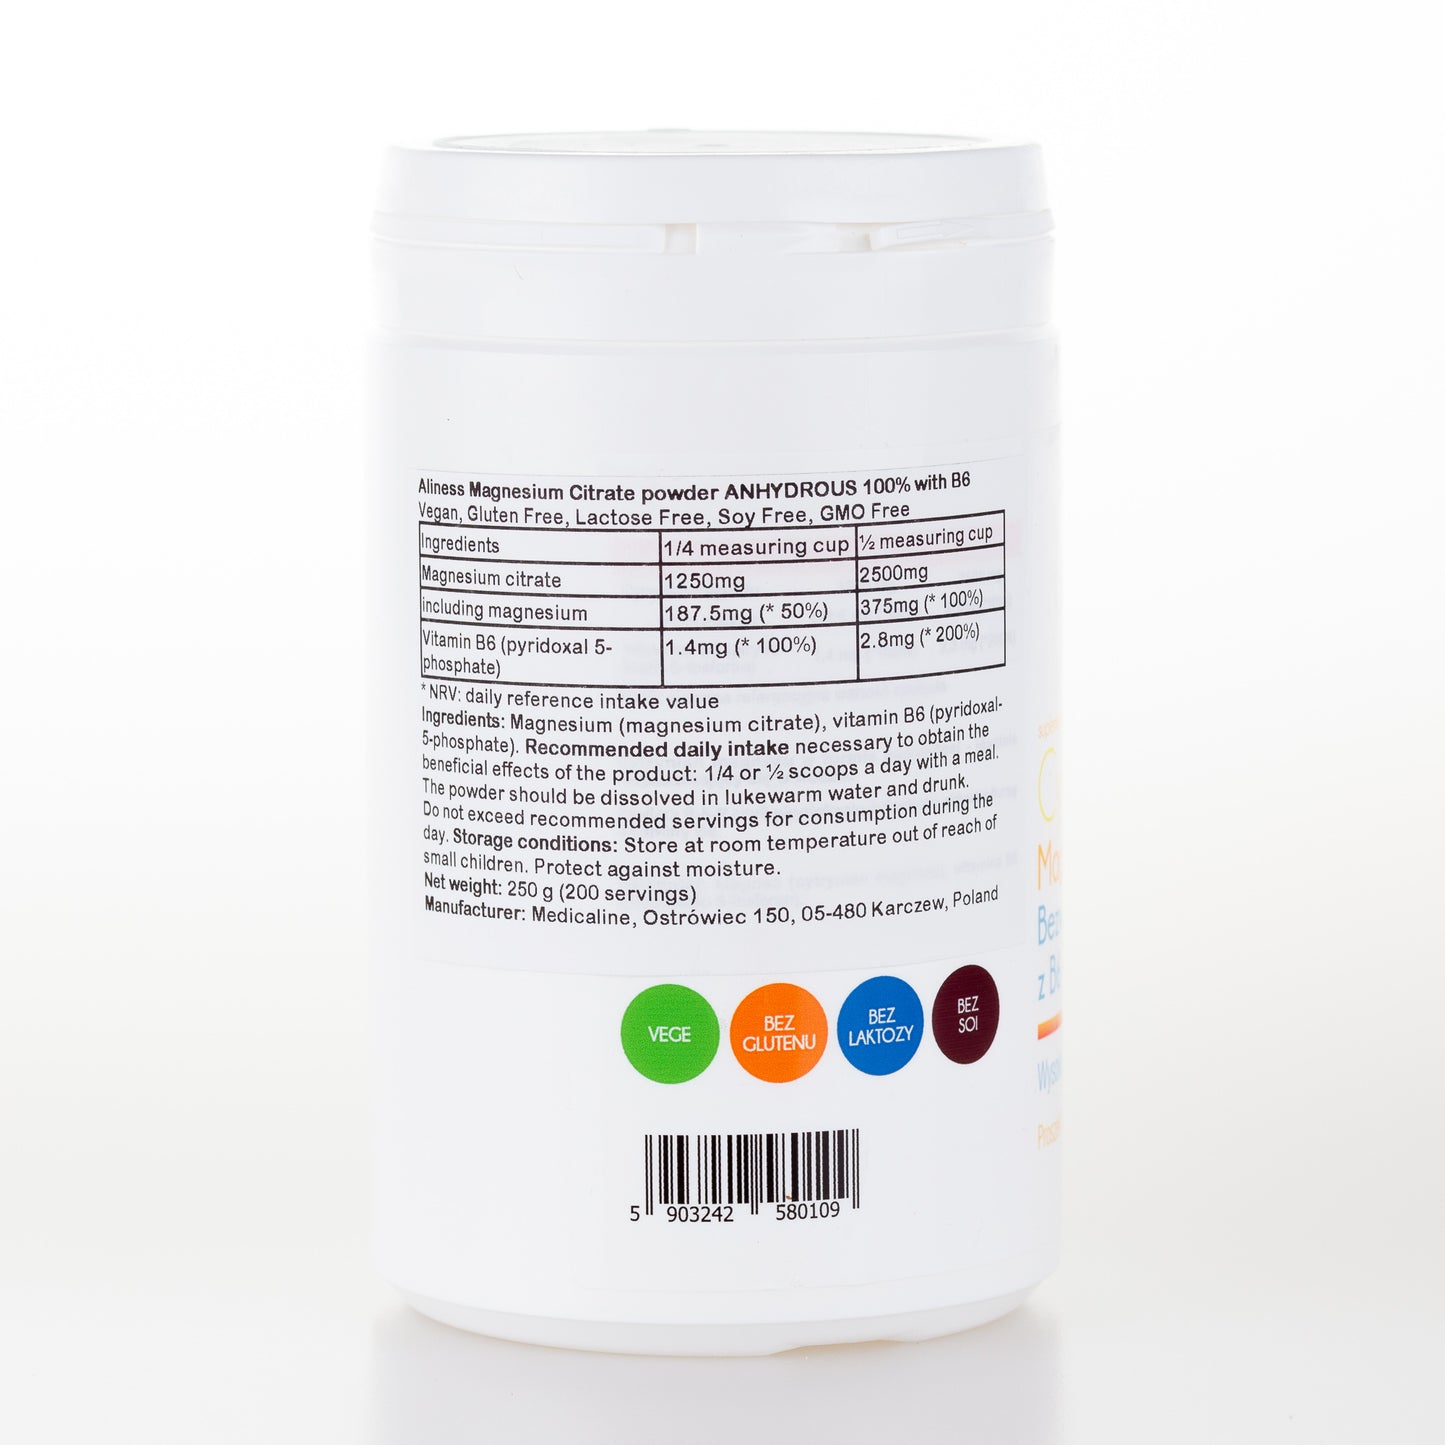 Magnesium Citrate Anhydrous Powder with Vitamin B6 (P-5-P), 250g